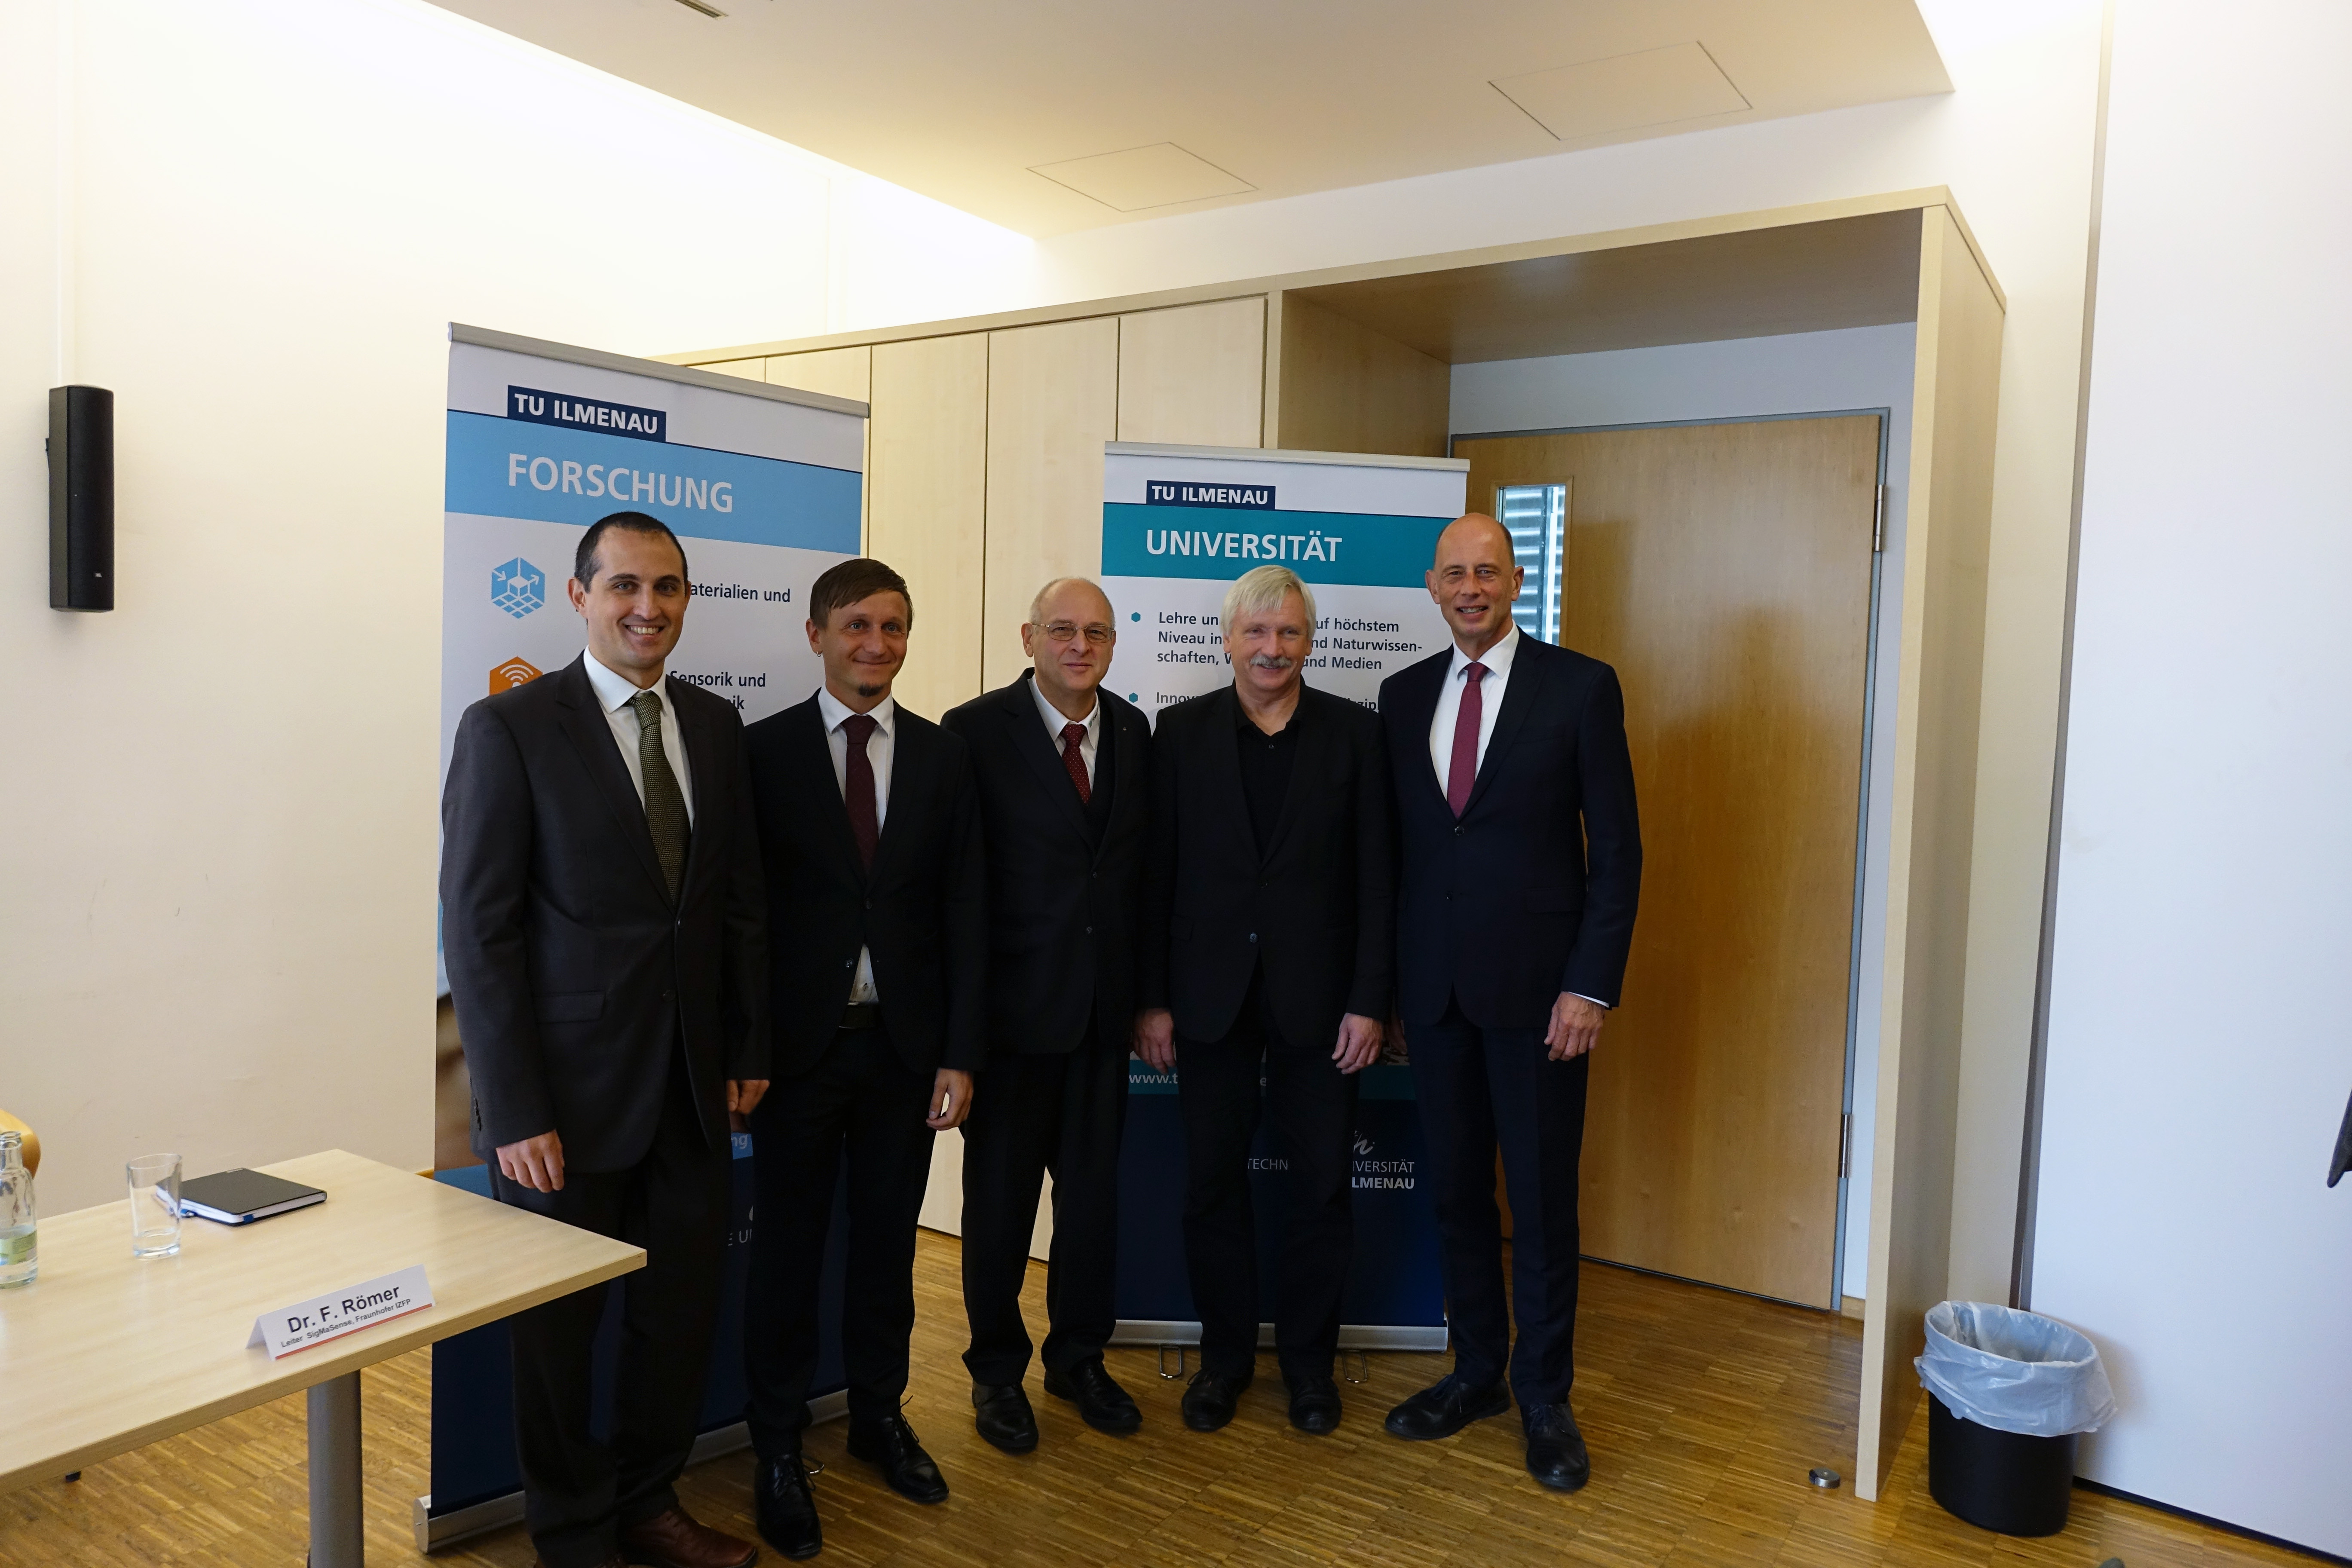 Giovanni Del Galdo and Florian Römer from “SigMaSense”, Randolf Hanke (Fraunhofer IZFP), Rector Peter Scharff and Minister Wolfgang Tiefensee (from left) present the new perspectives for Ilmenau.